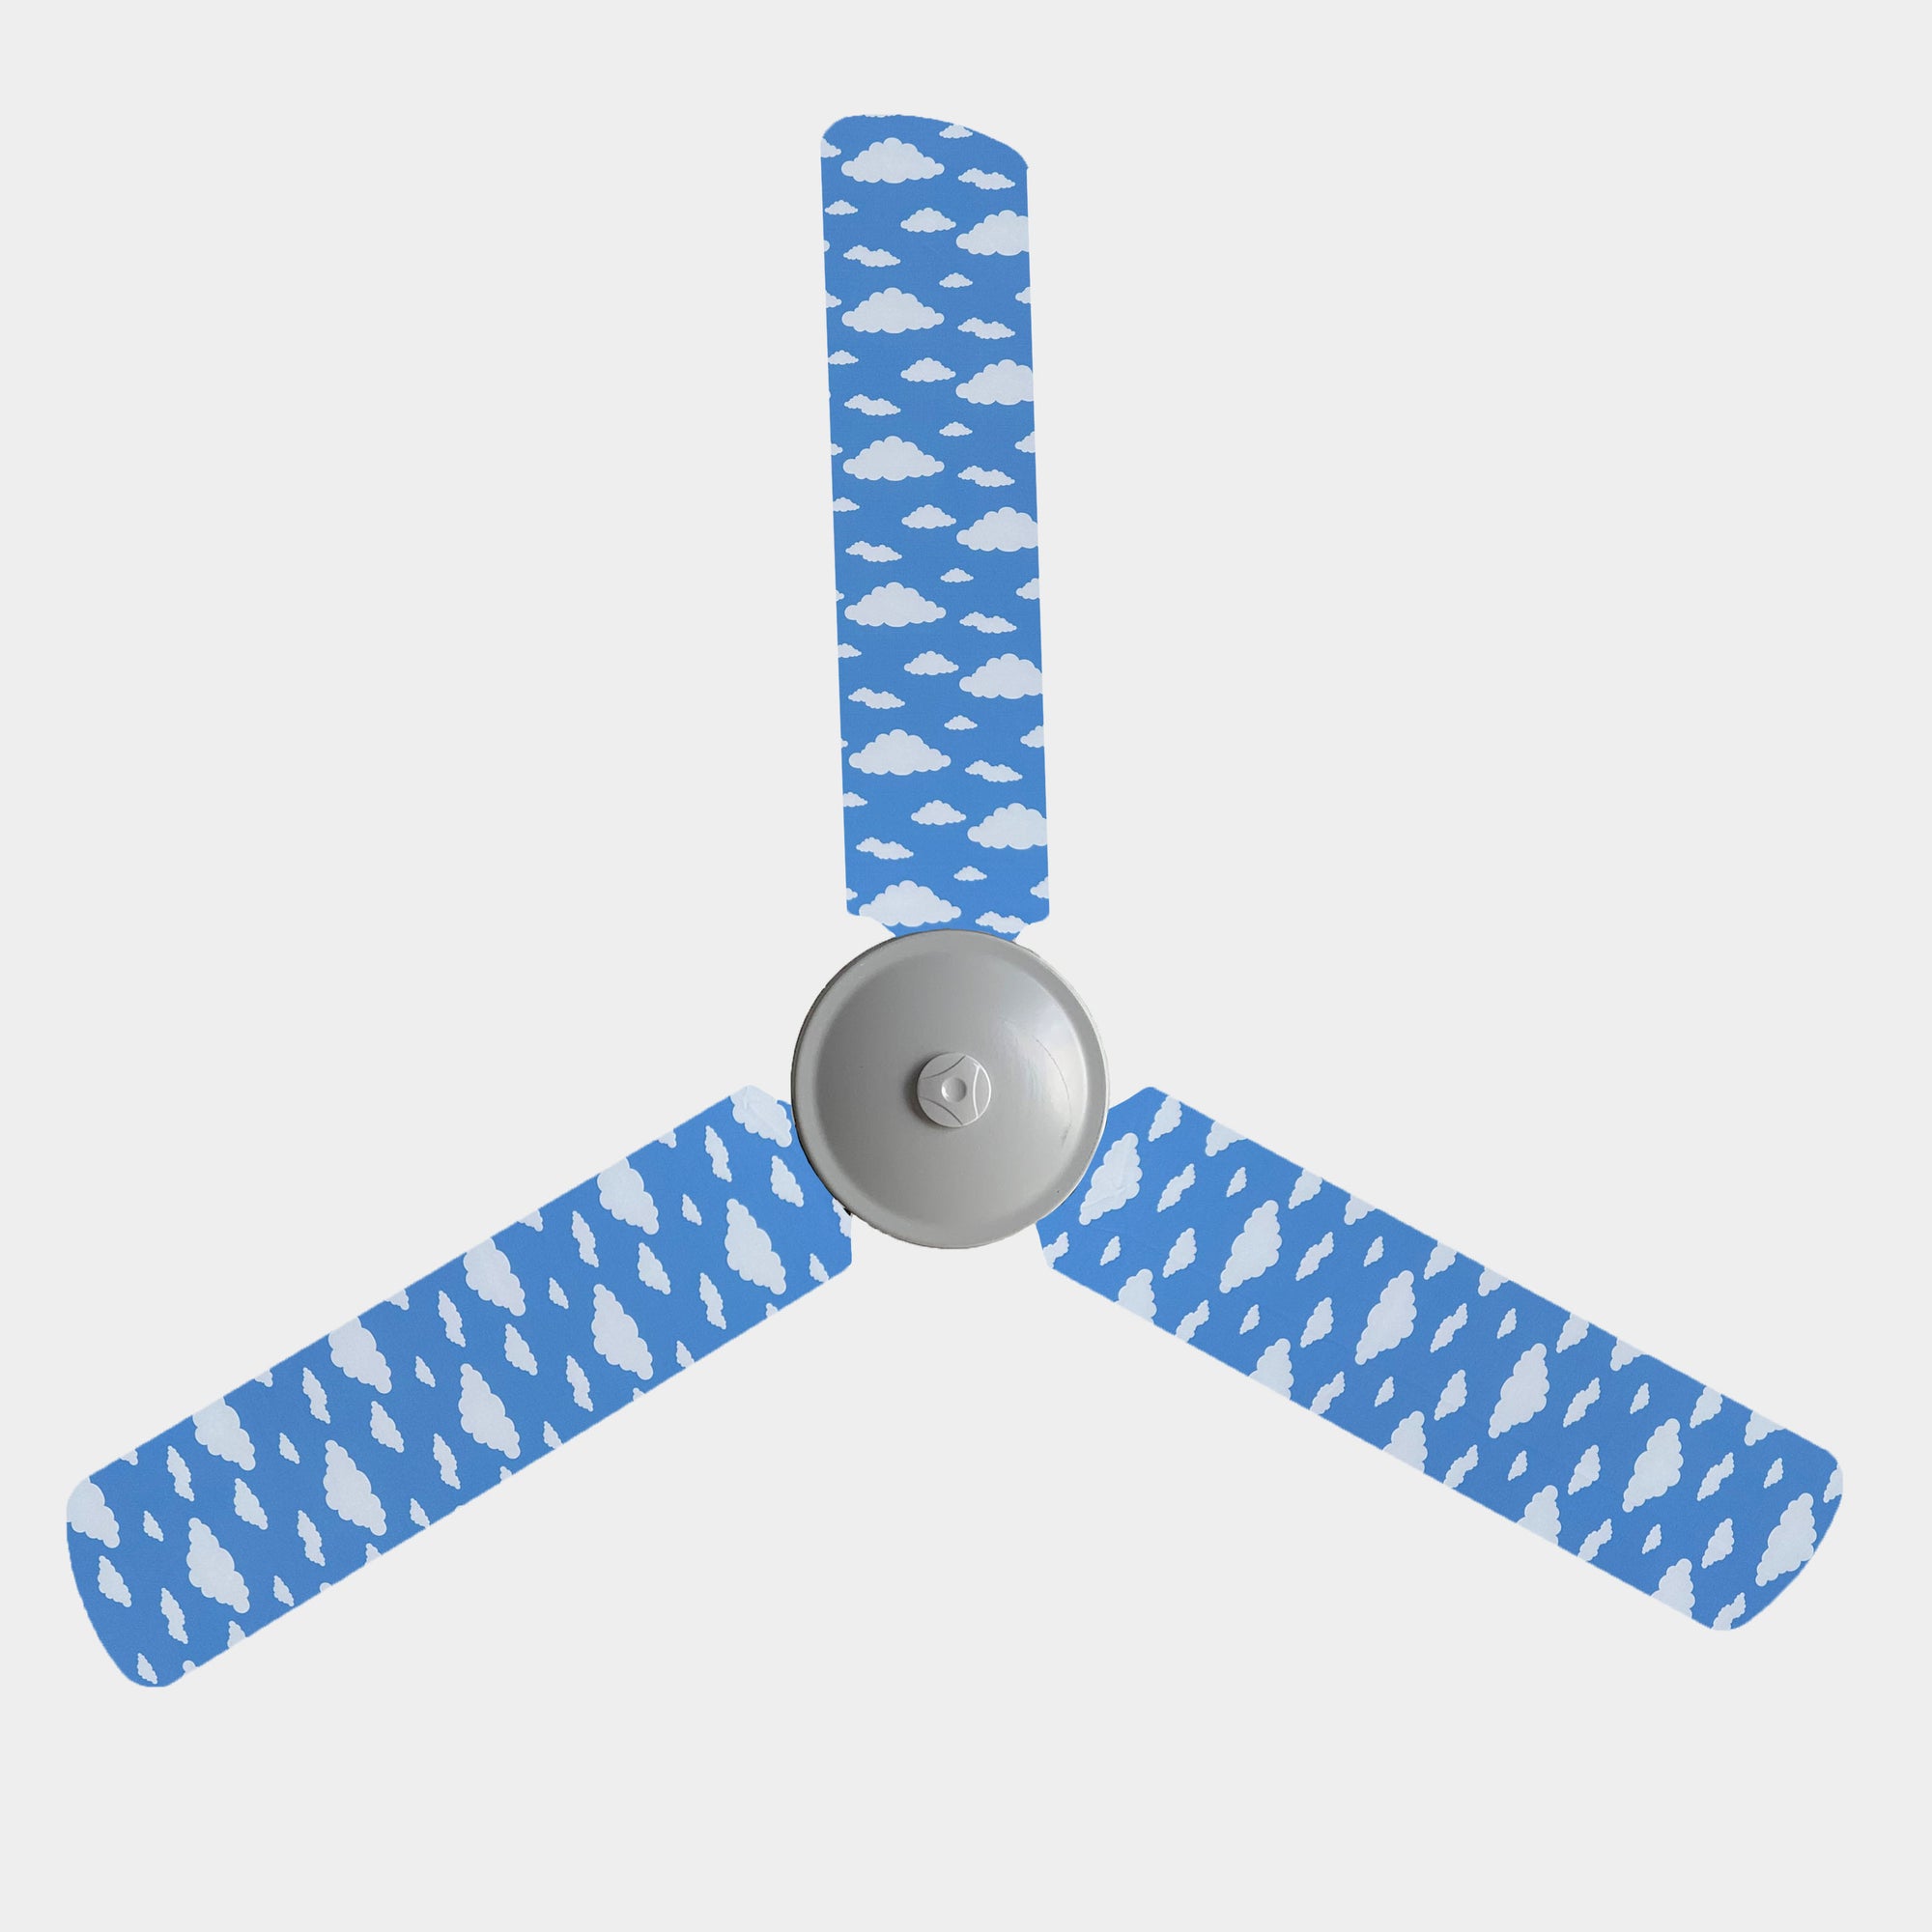 Blue sky background with white fluffy cloud fan blade covers on a 3 blade fan